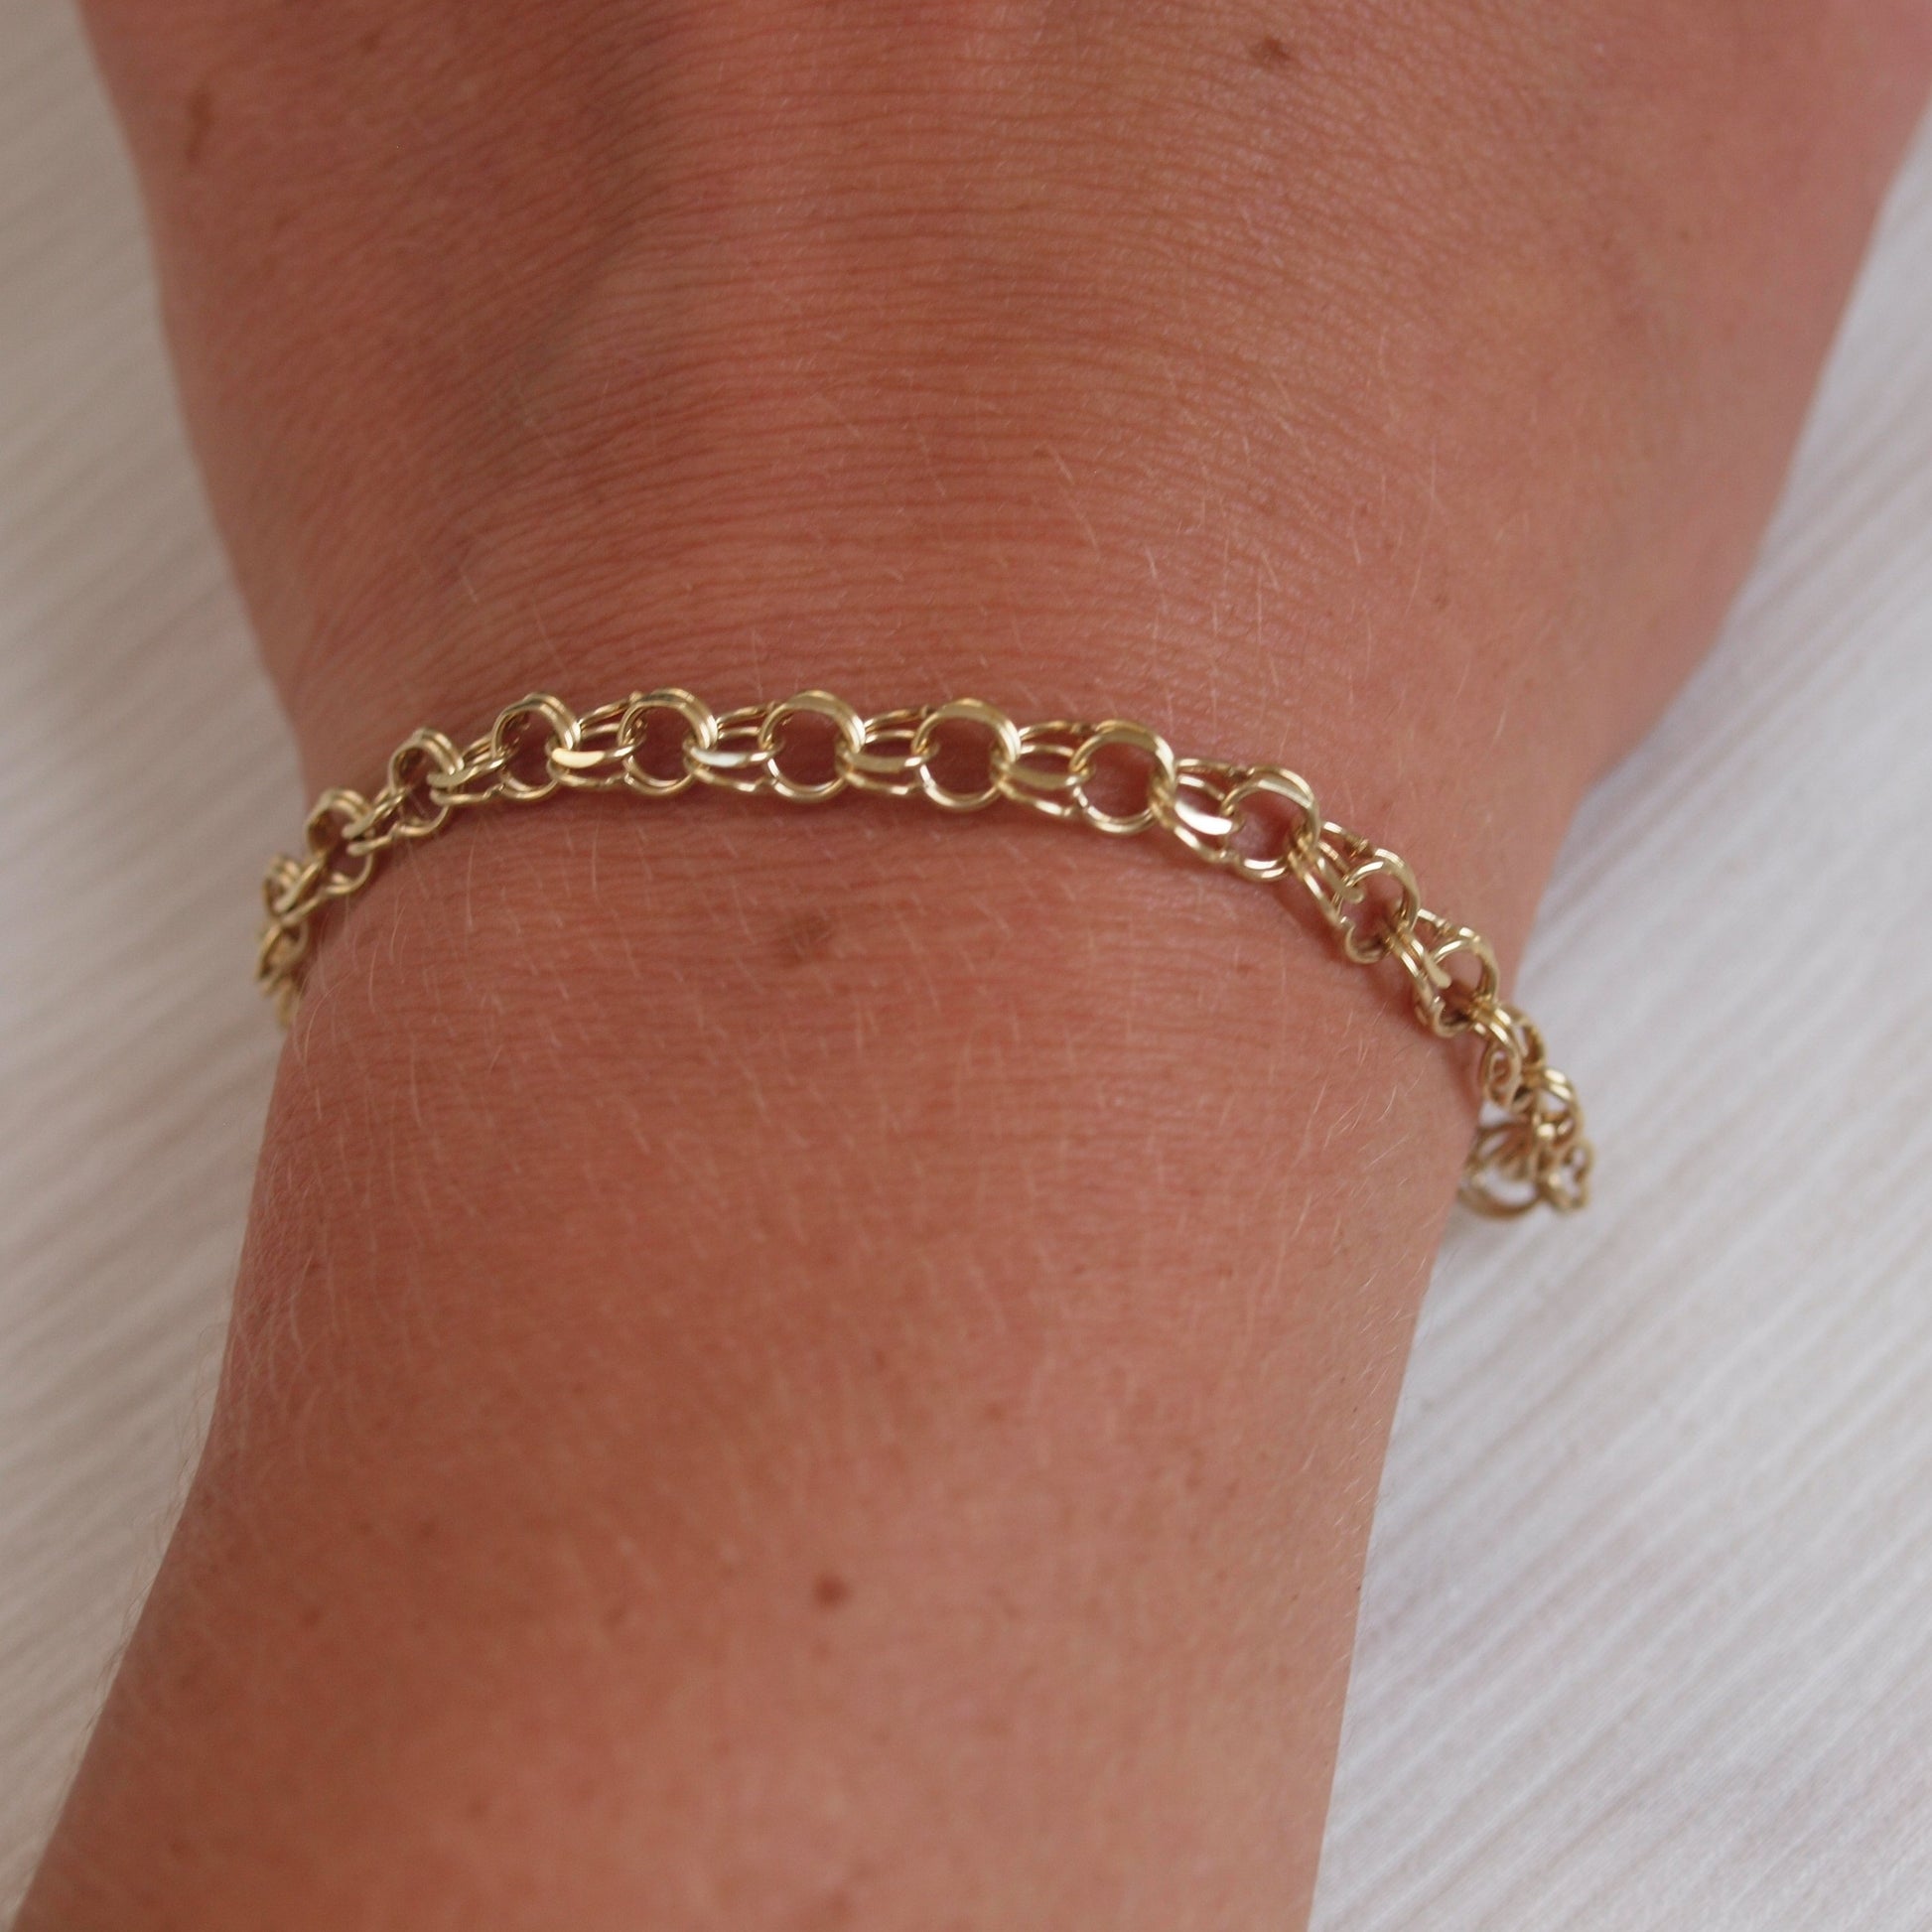 Double Link 14K Yellow Gold Chain Link Bracelet